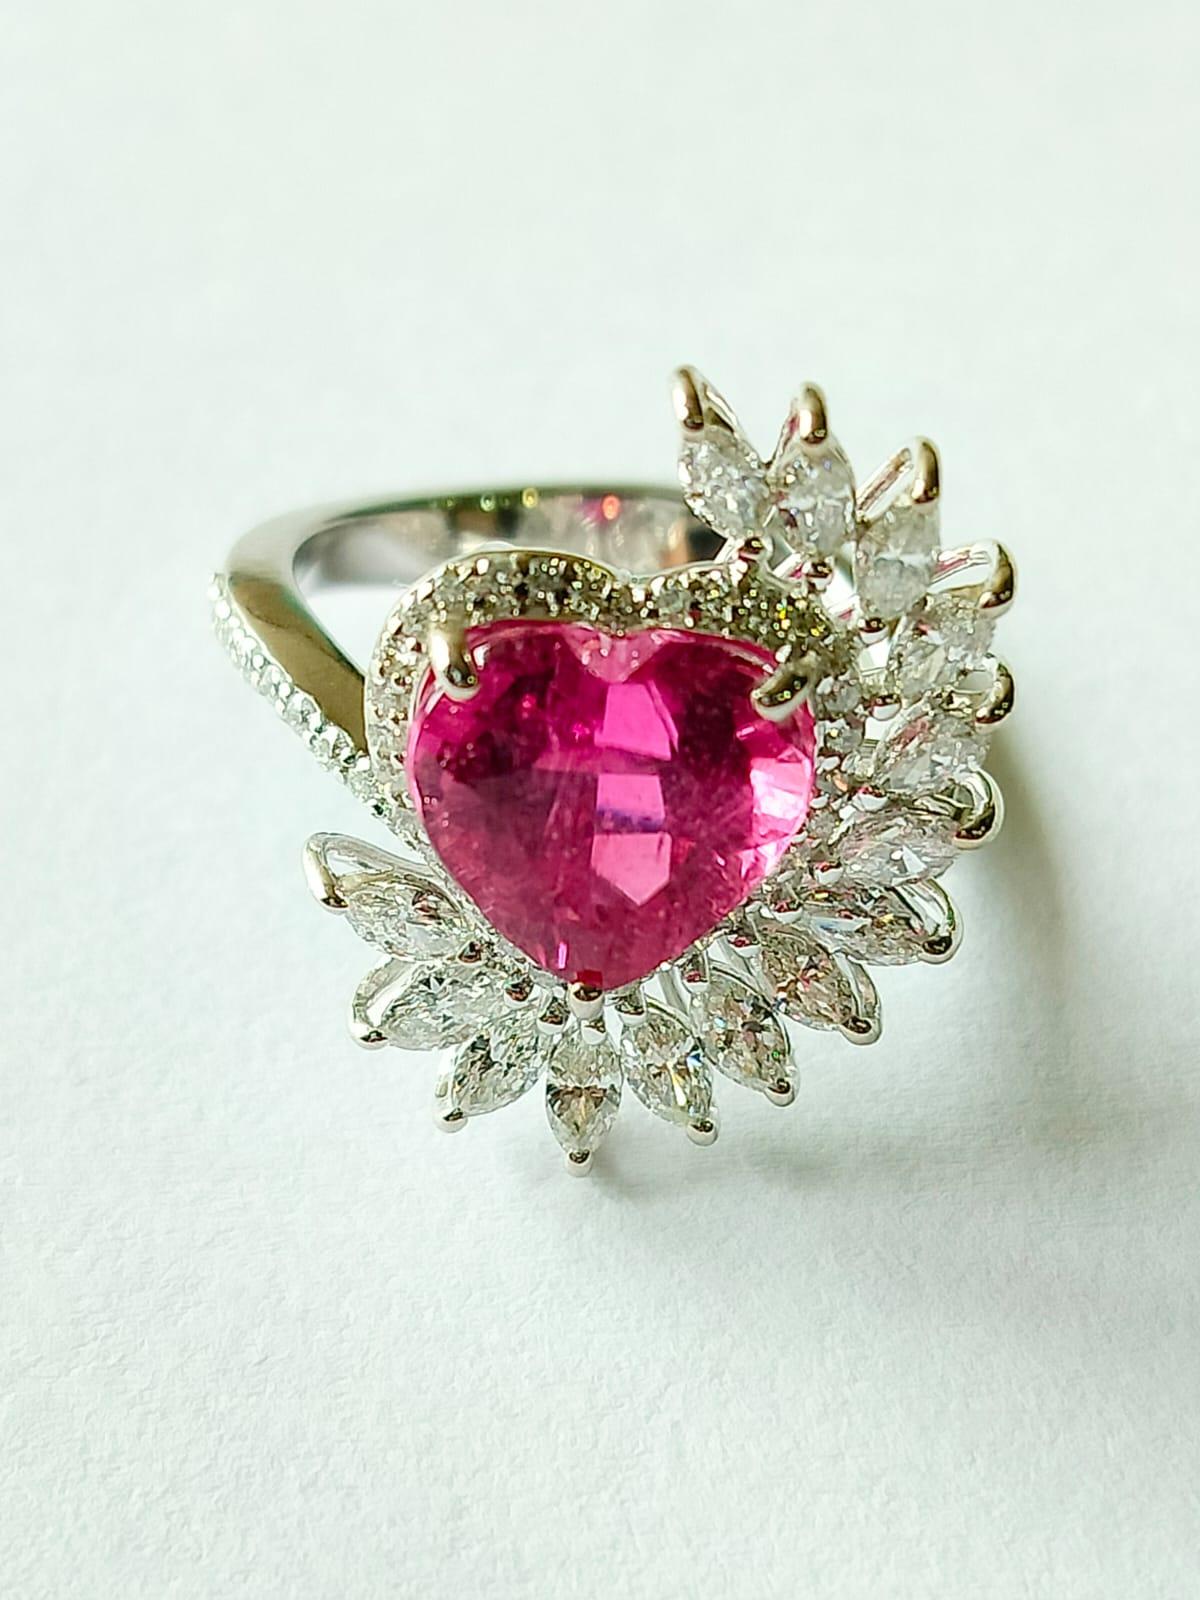 Heart Cut Set in 18K Gold, 3.51 Carats, Rubellite & Diamonds Engagement /Cocktail Ring For Sale